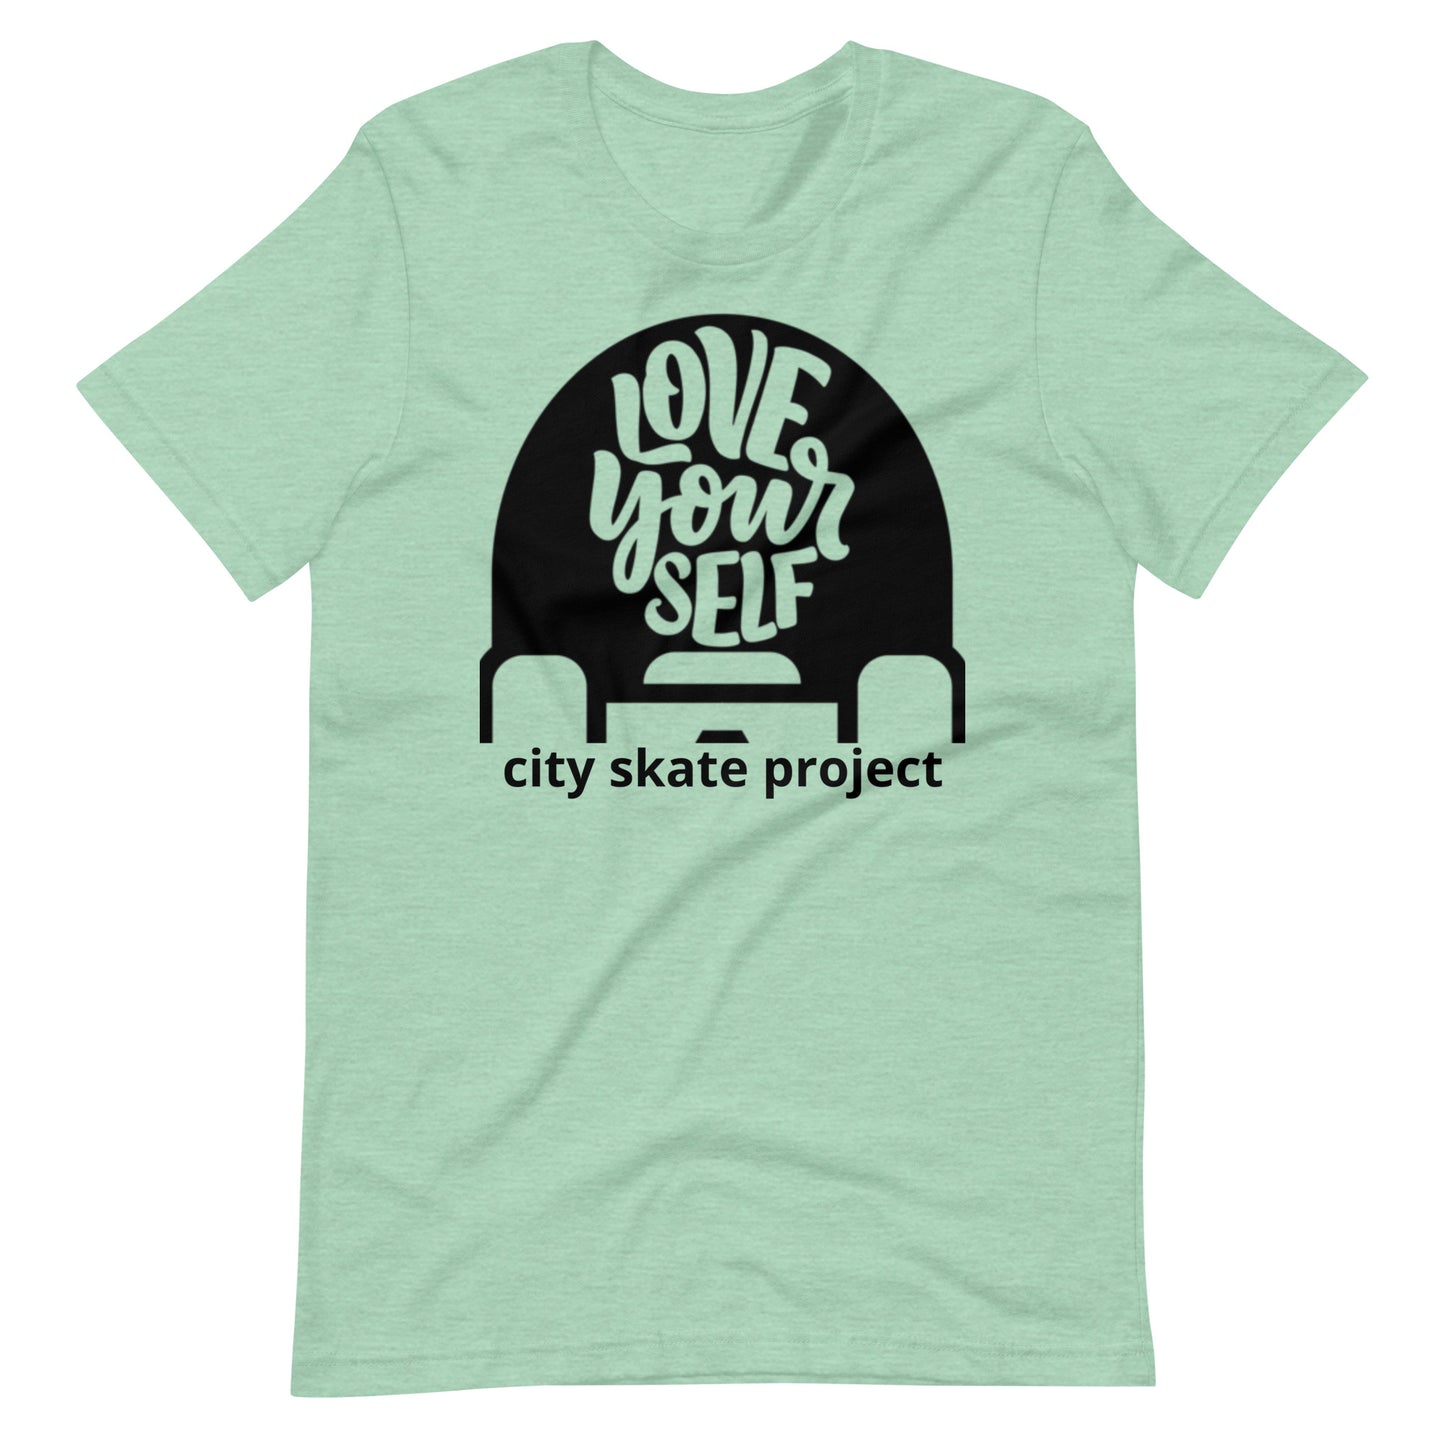 City Skate Project "Love Yourself" Unisex t-shirt